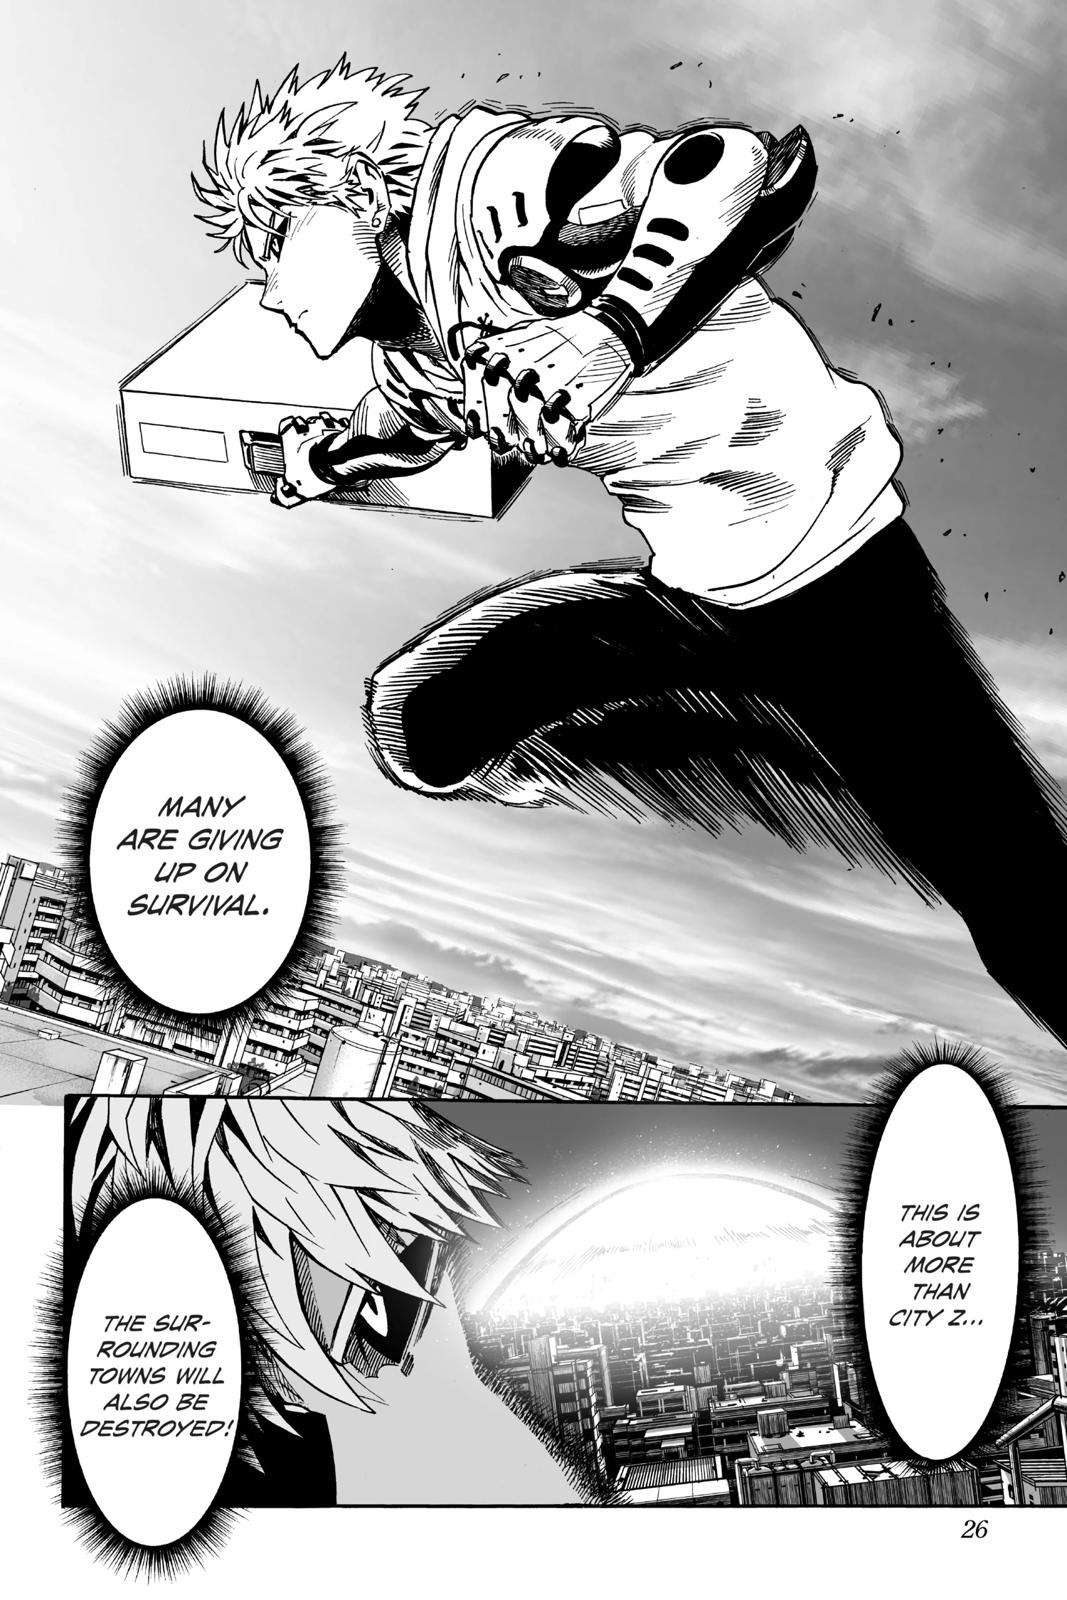 One-Punch Man, Punch 21 image 24